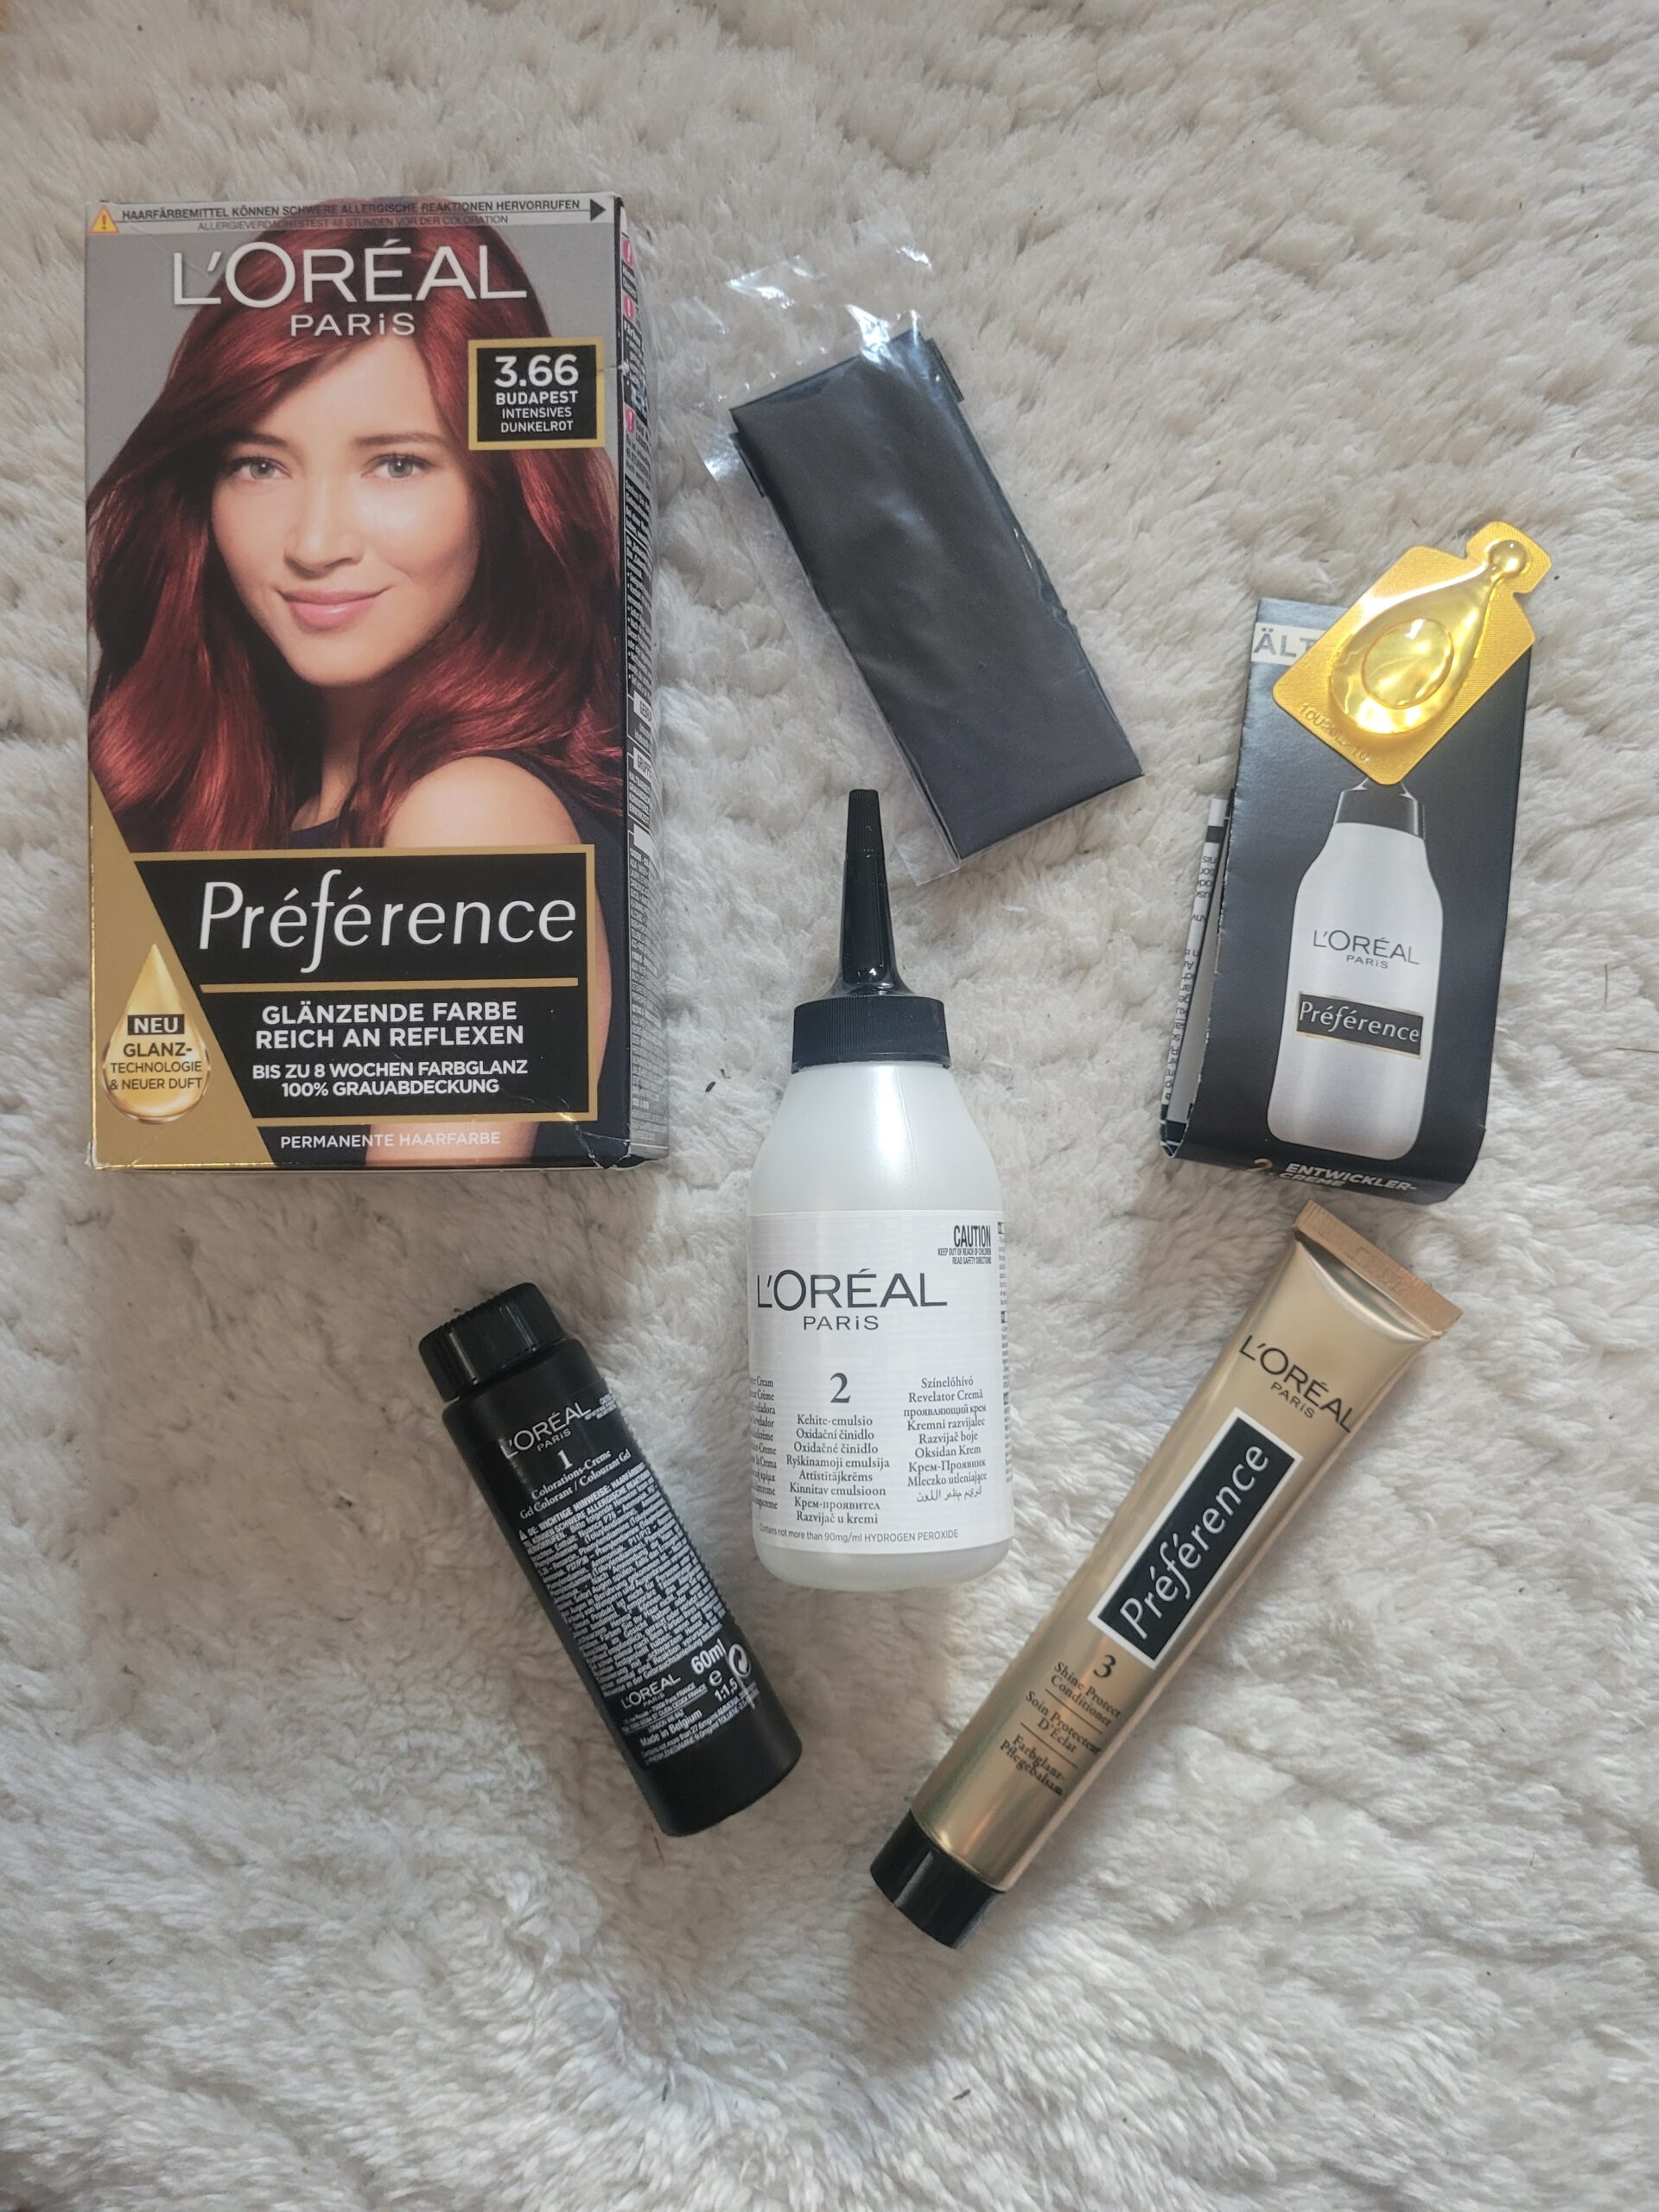 You are currently viewing L’OREAL Paris Préférence – Budapest intensives Dunkelrot<span class='yasr-stars-title-average'><div class='yasr-stars-title yasr-rater-stars'
                           id='yasr-overall-rating-rater-6b3146e6bf8ae'
                           data-rating='5'
                           data-rater-starsize='16'>
                       </div></span>